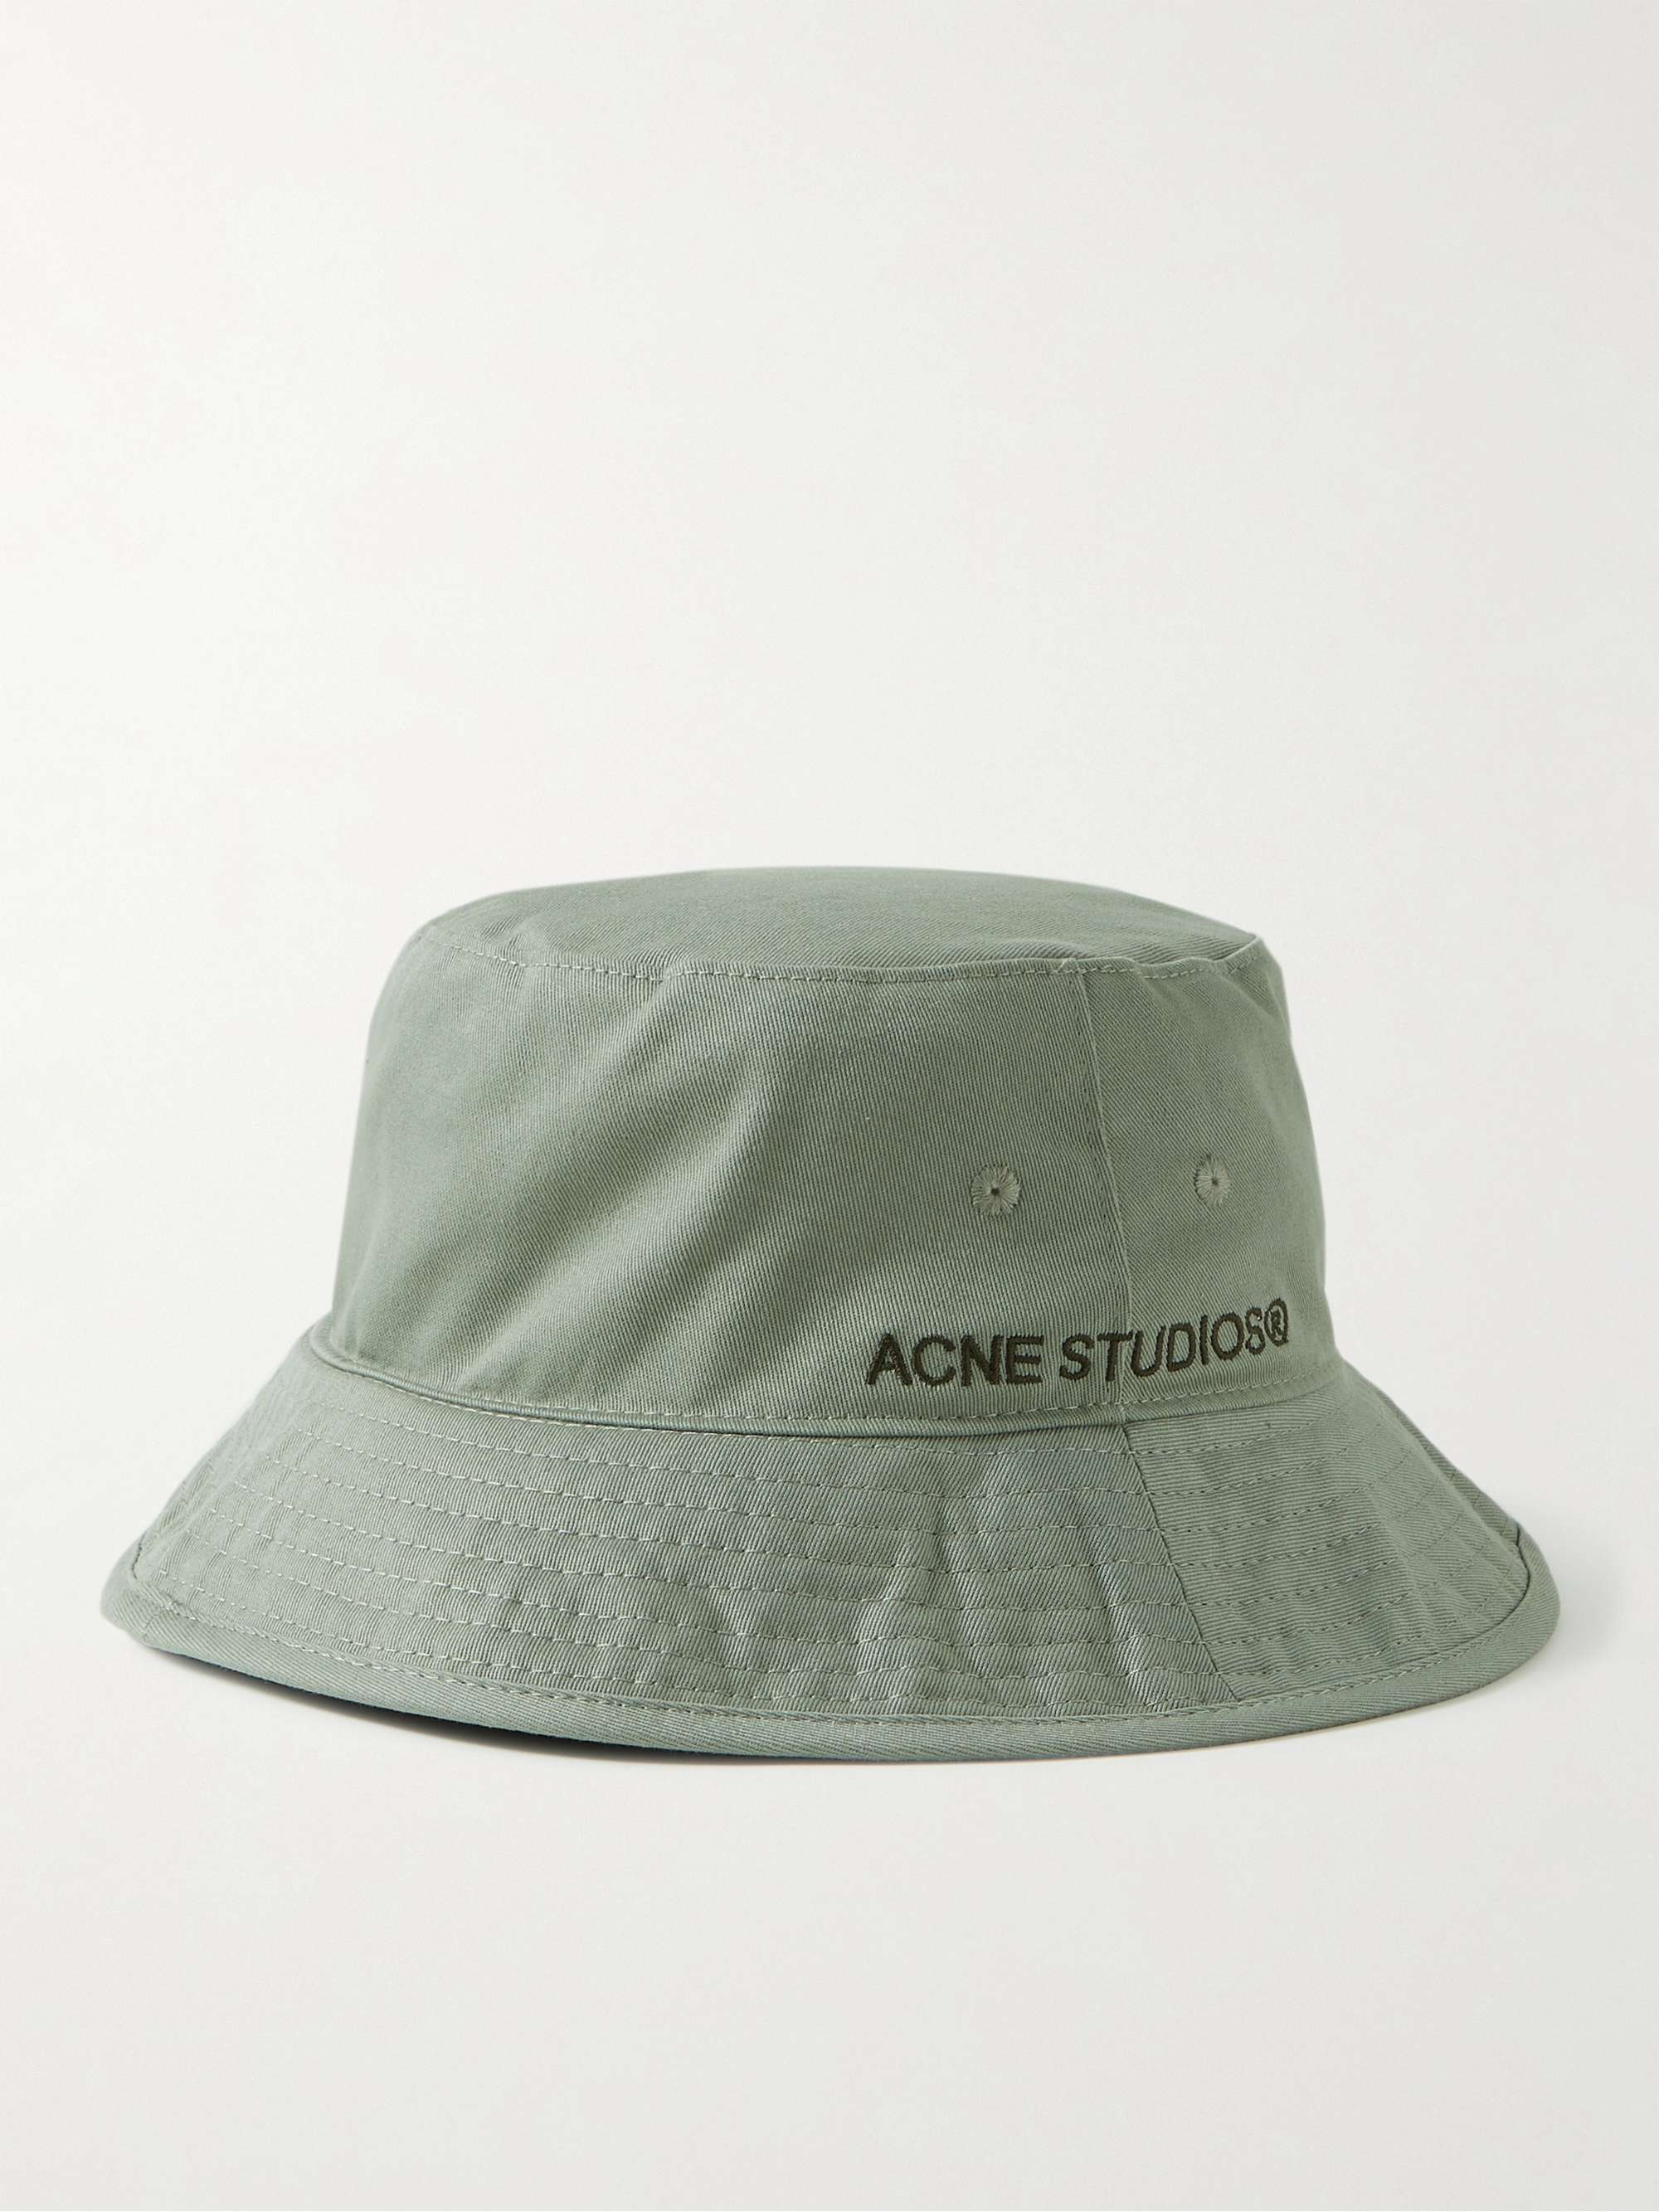 Mens Accessories Hats for Men Acne Studios Cotton Brimmo Twill Logo Bucket Hat in Sage Green Green 